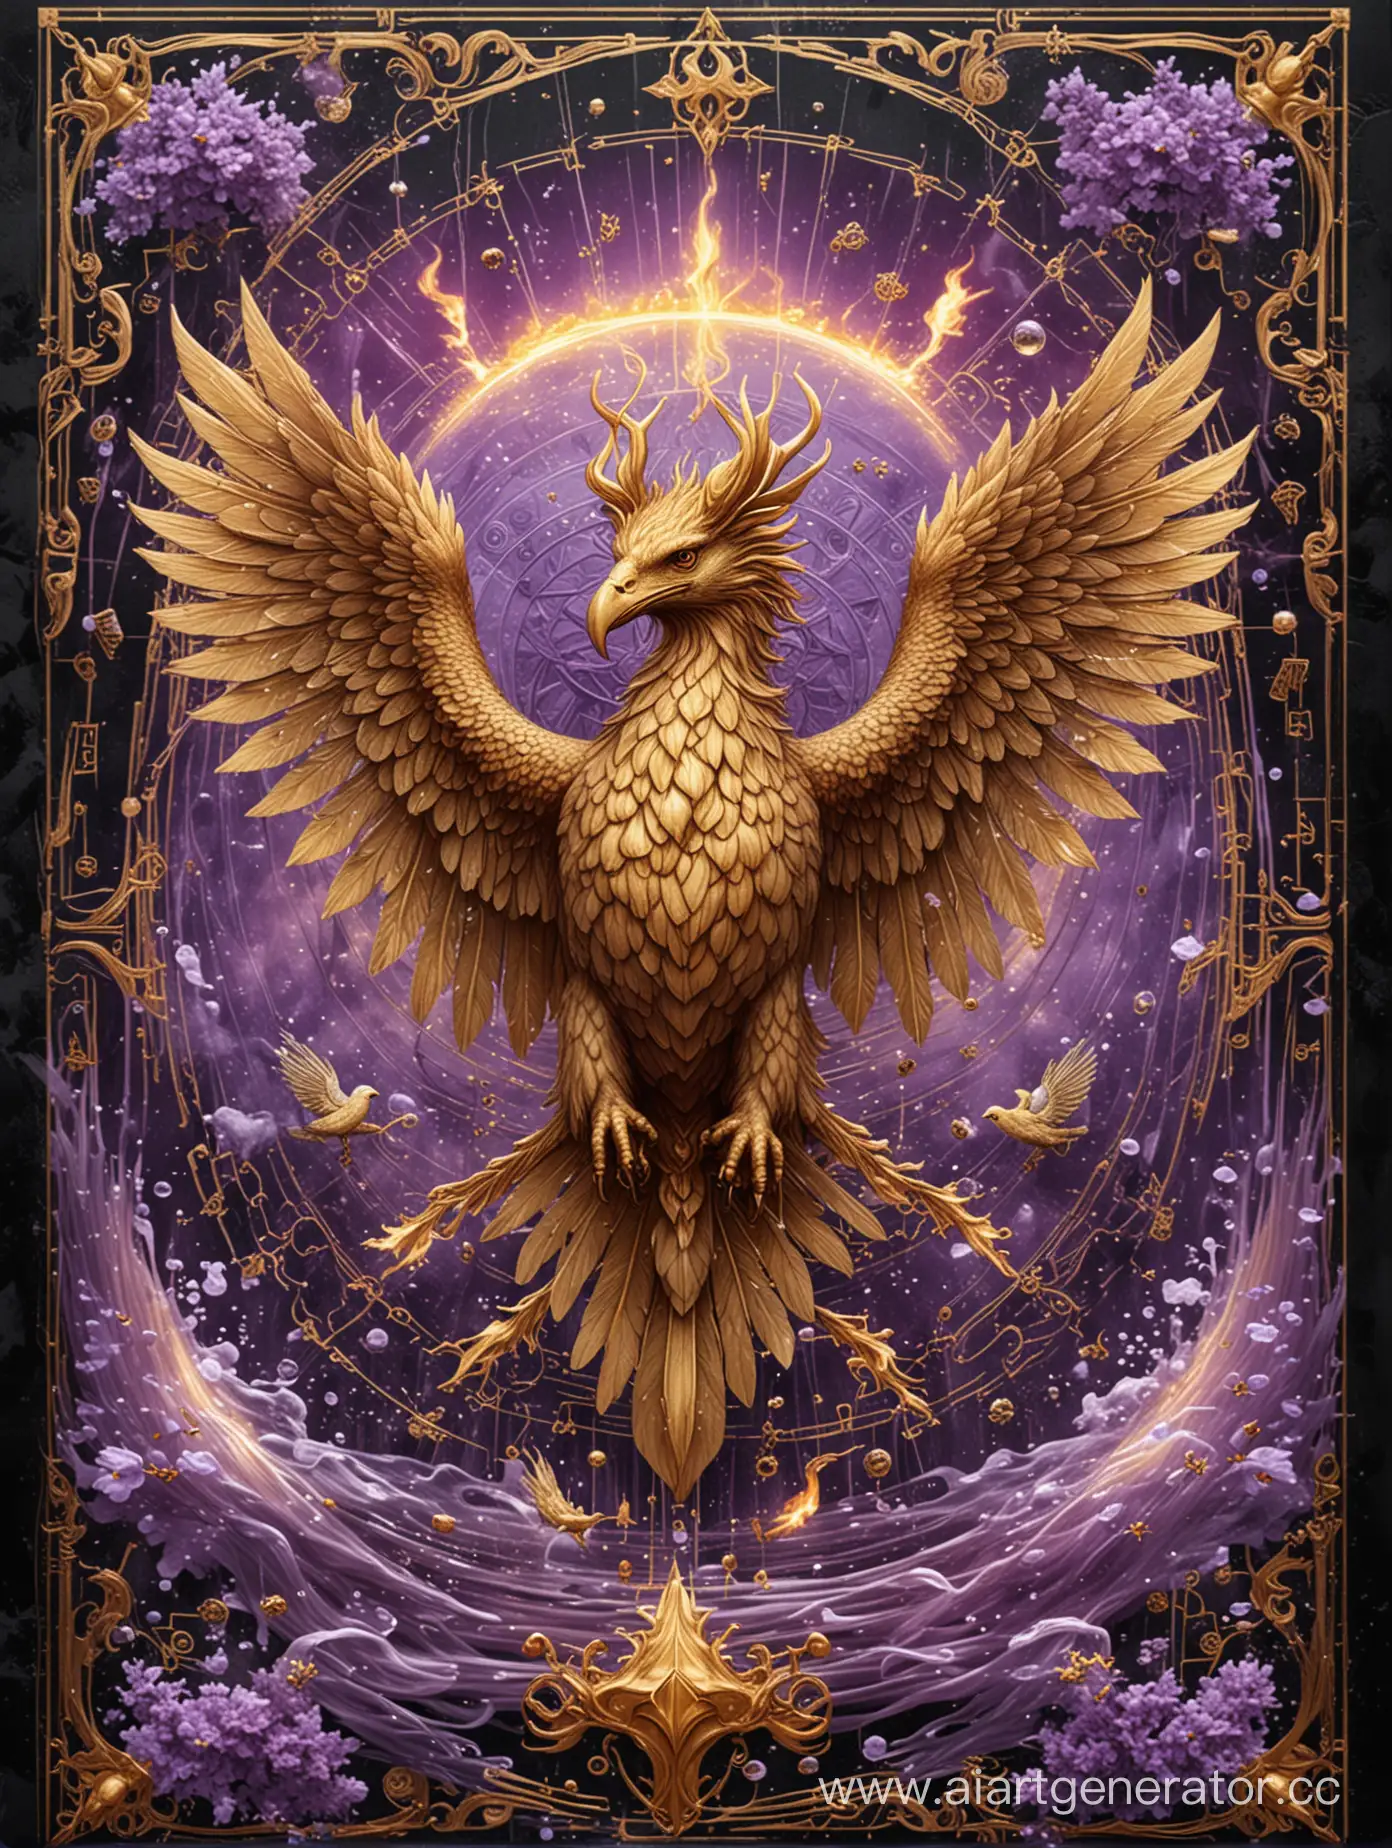 Futuristic-Tarot-Card-Back-with-Golden-Griffins-and-Elemental-Struggle